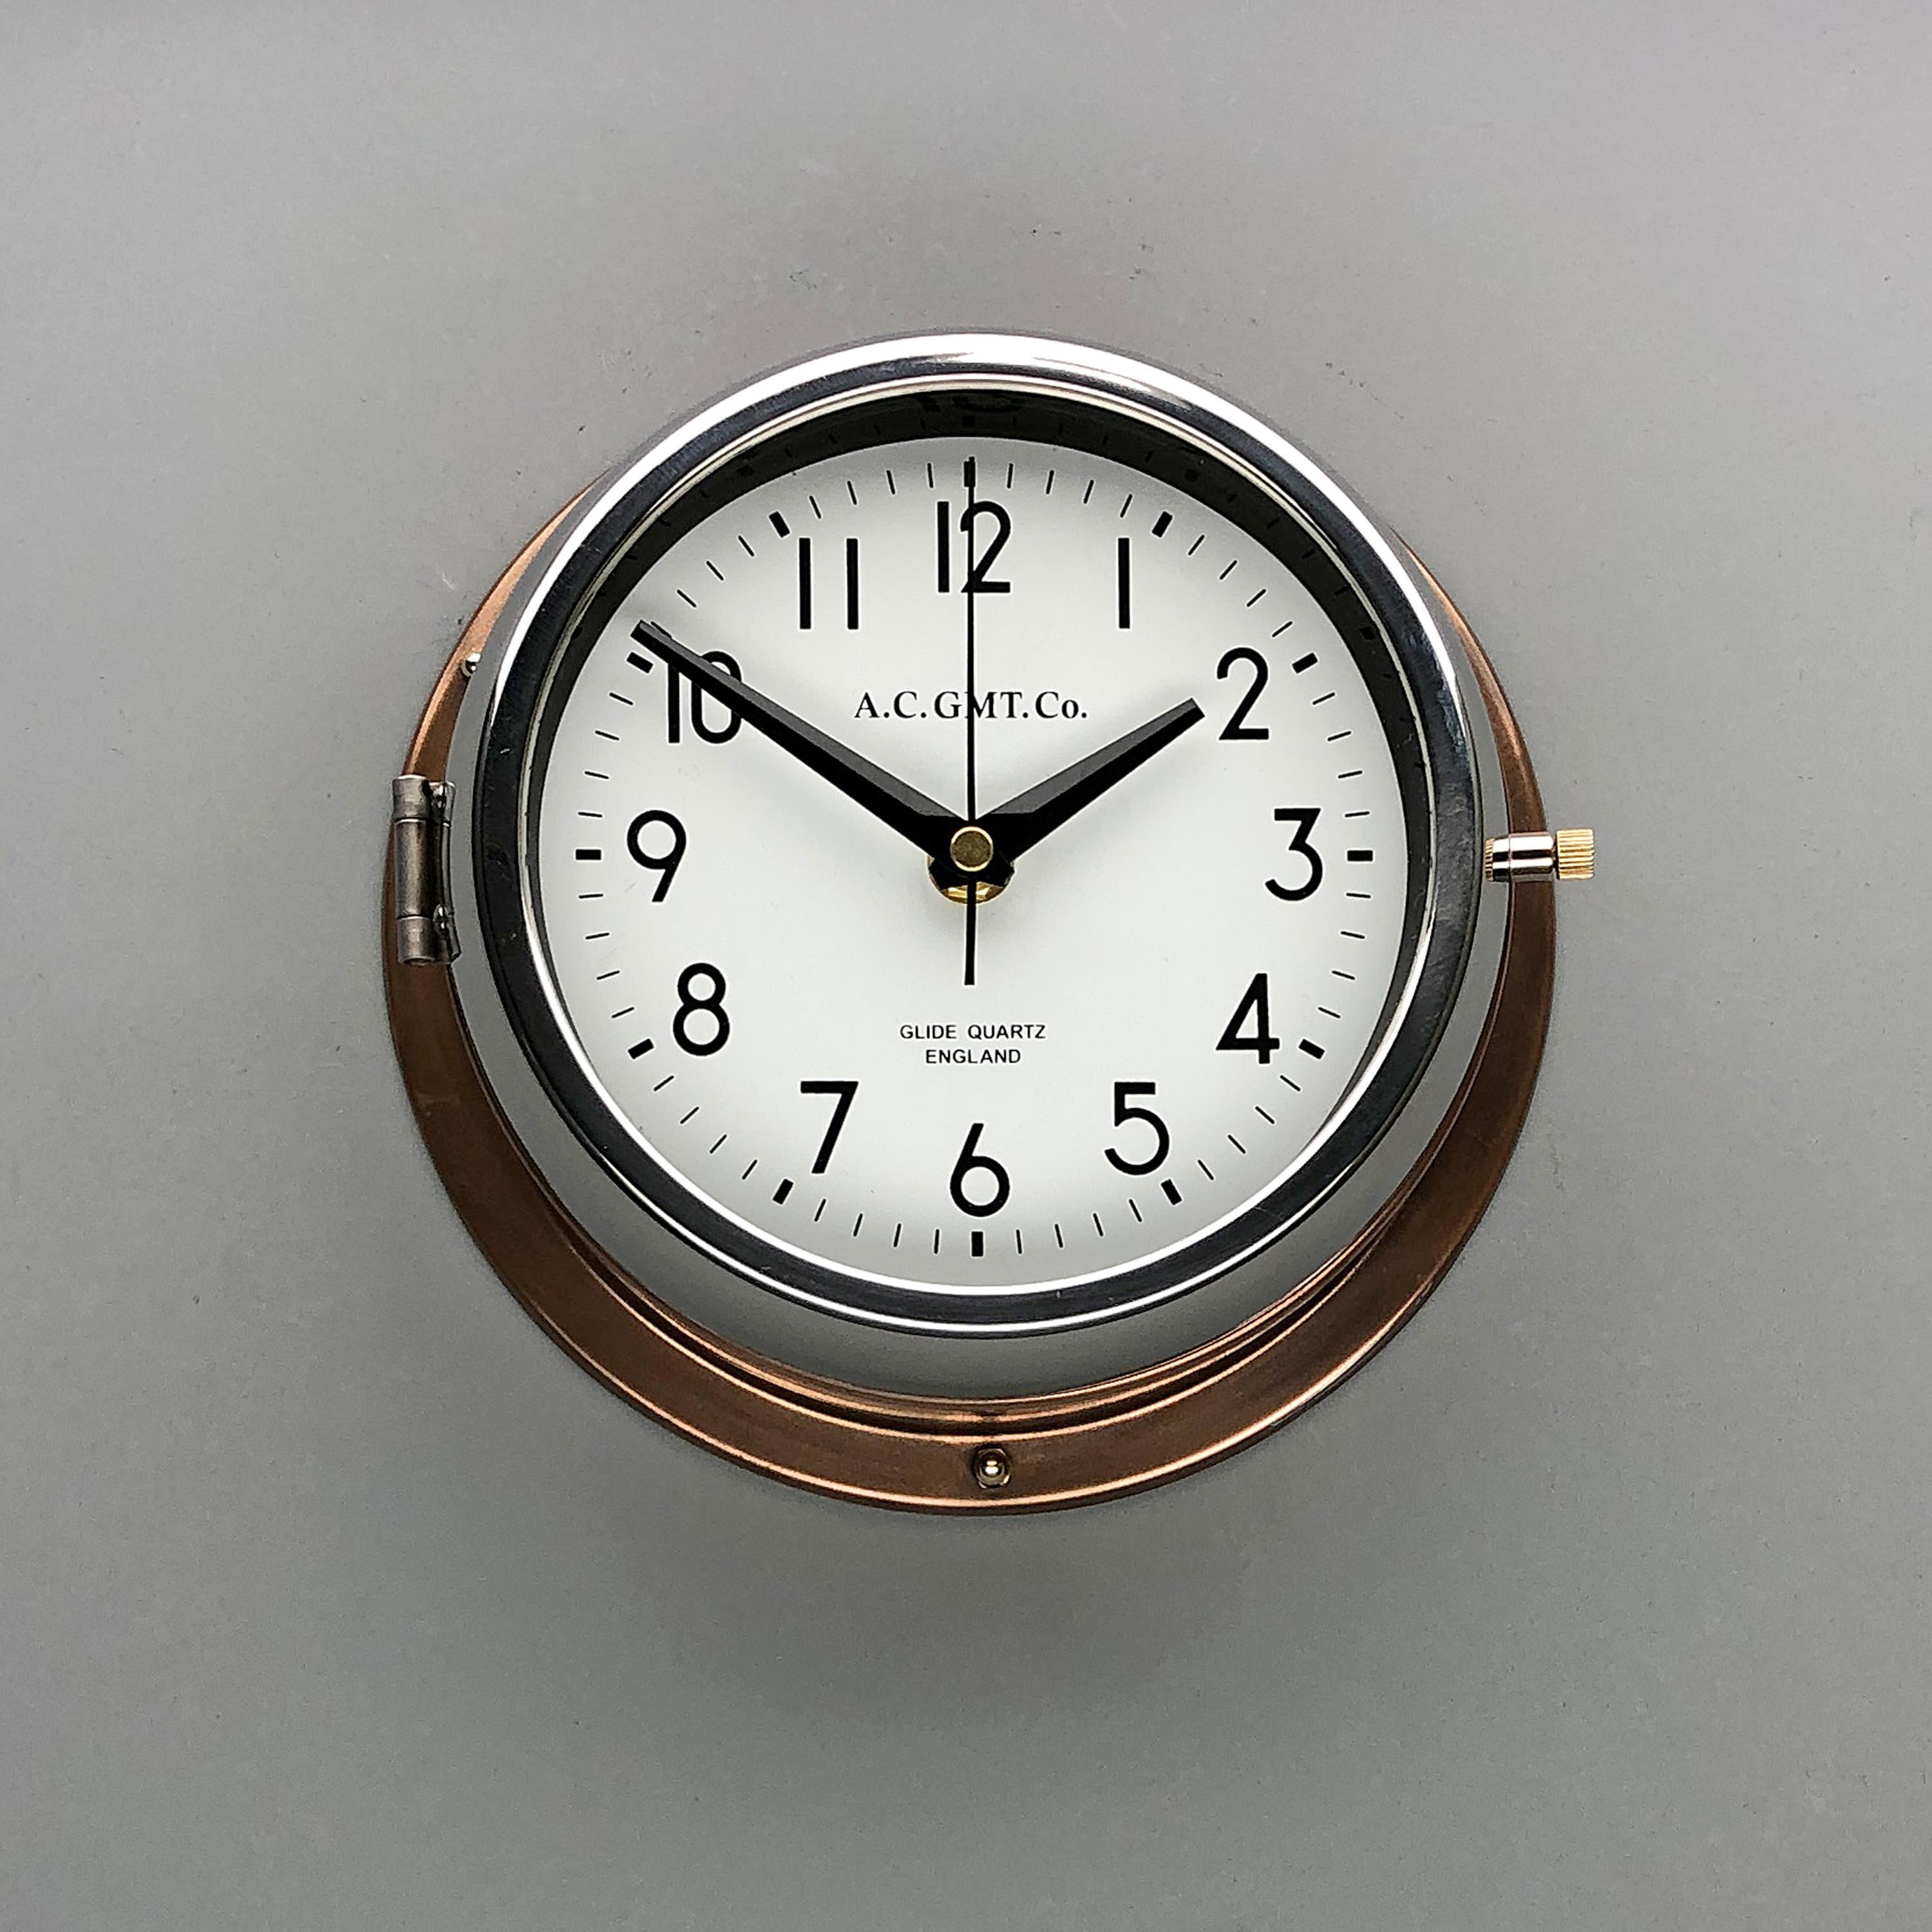 1970s British Bronze and Chrome AC GMT Co. Industrial Wall Clock White Dial 12